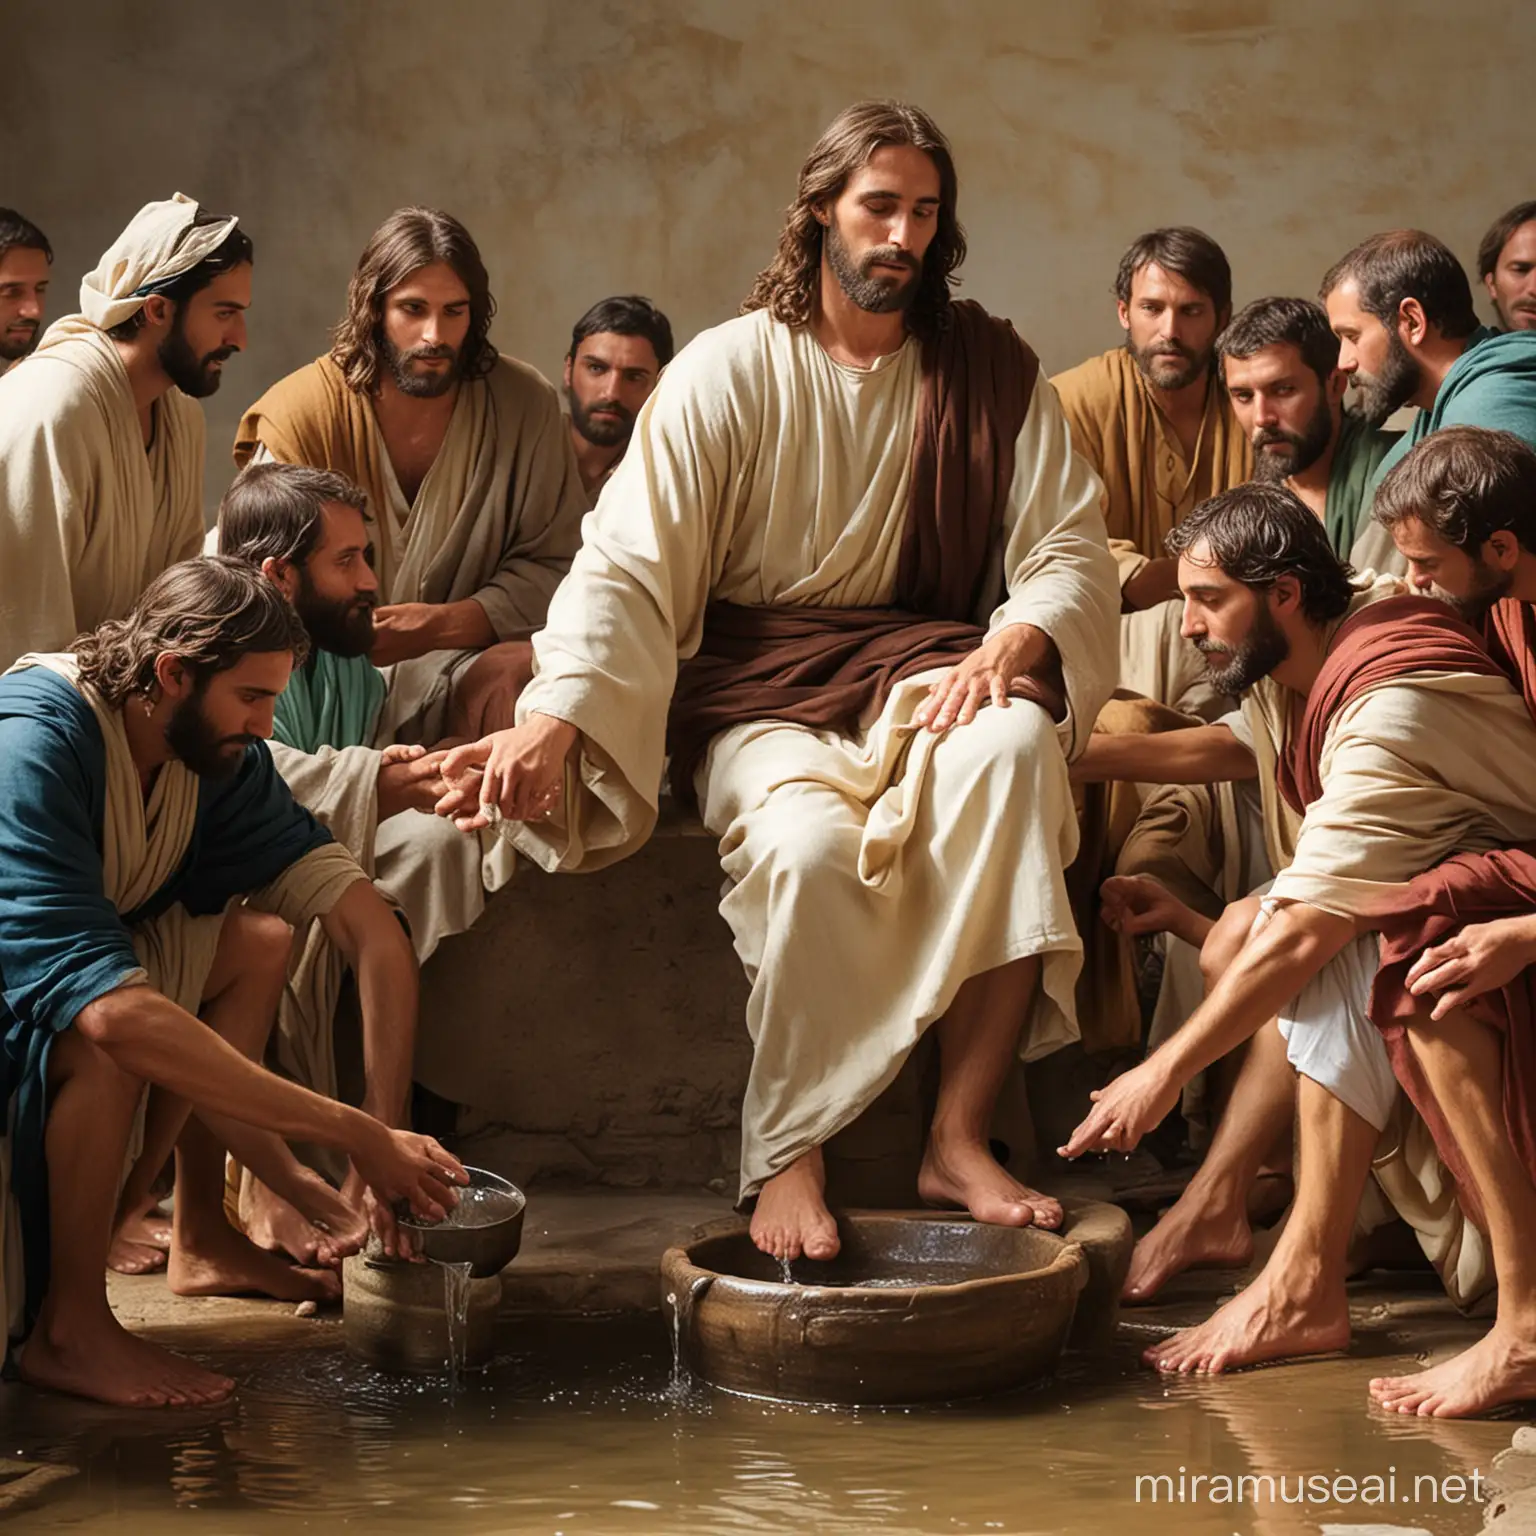 Jesus and Disciples in a Humble Foot Washing Ceremony